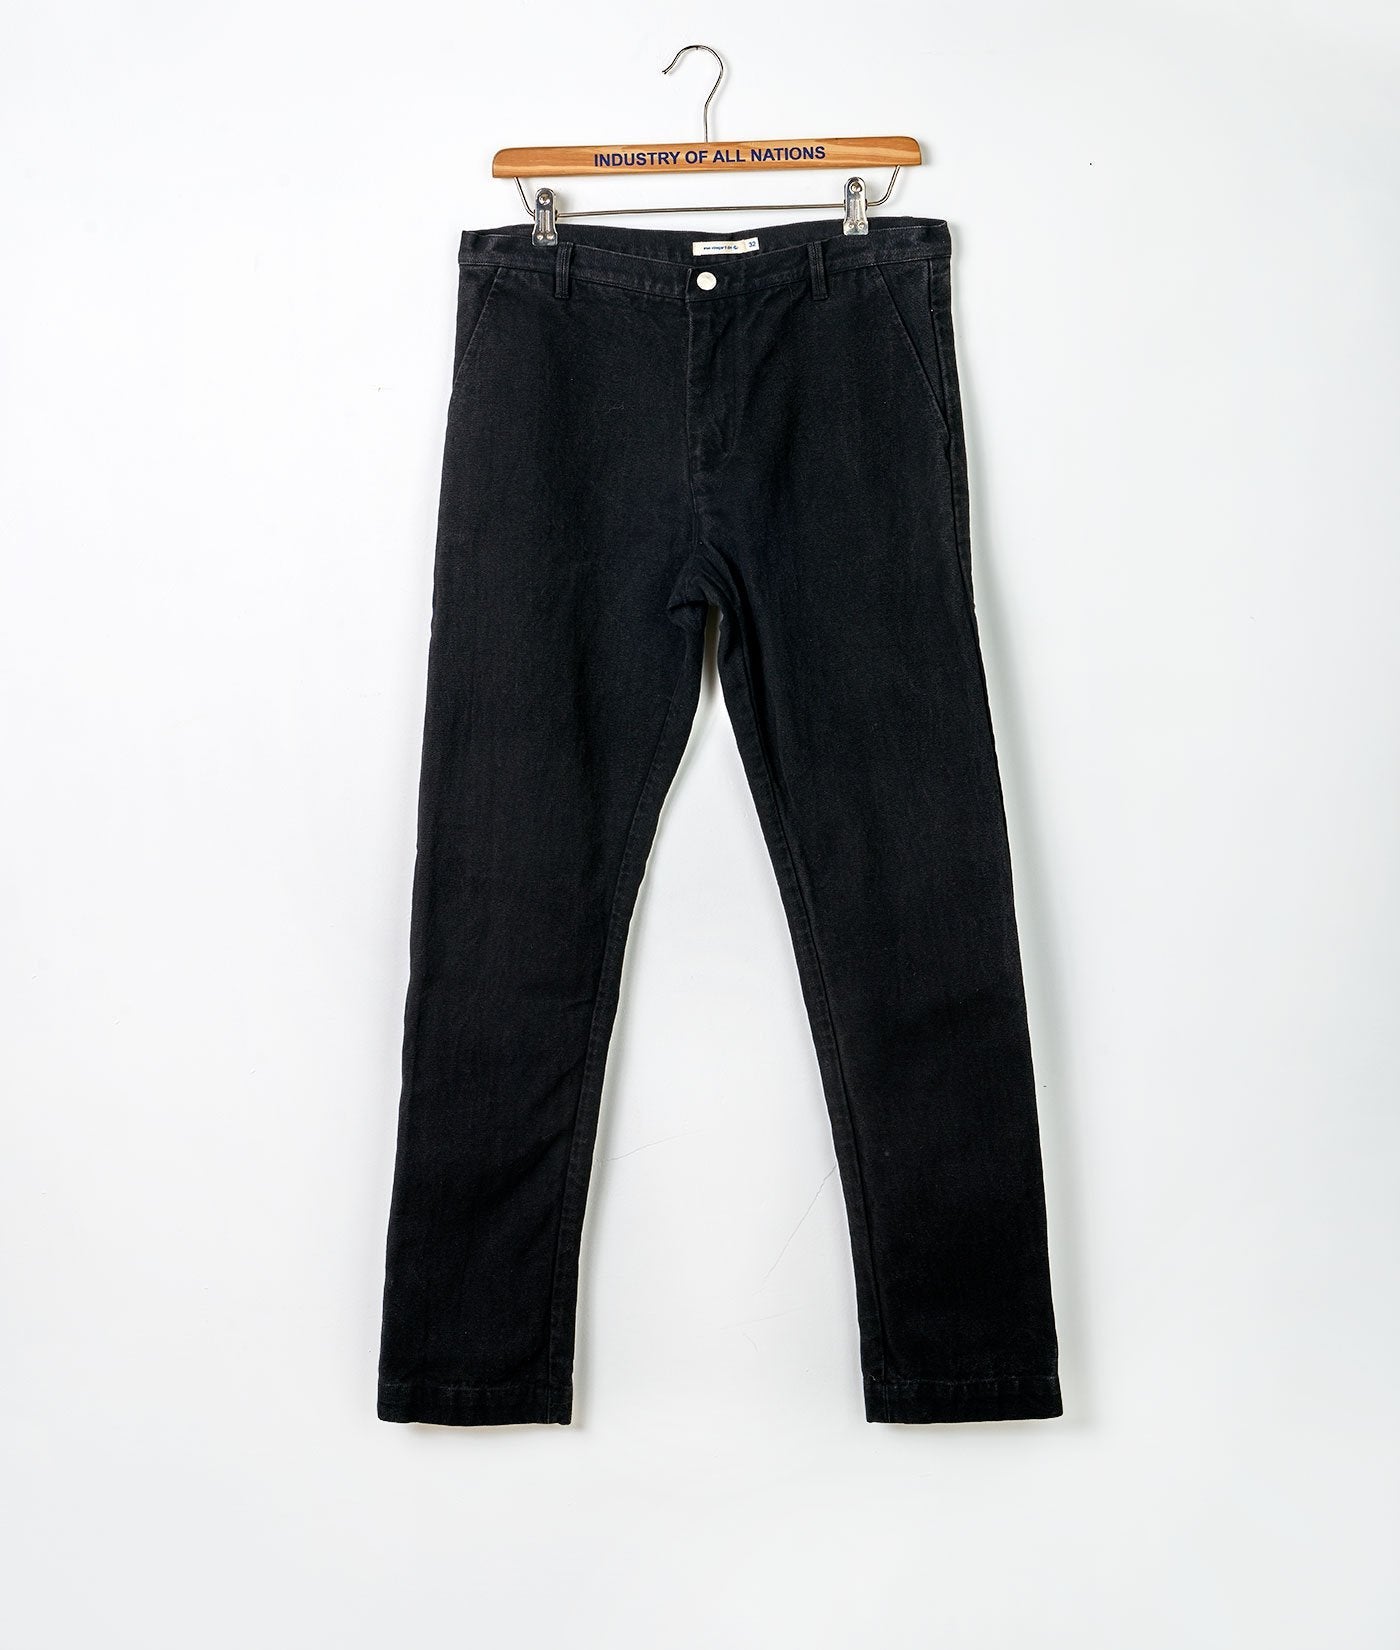 Industry of All Nations Organic Cotton Canvas Work Pants Lorn 8